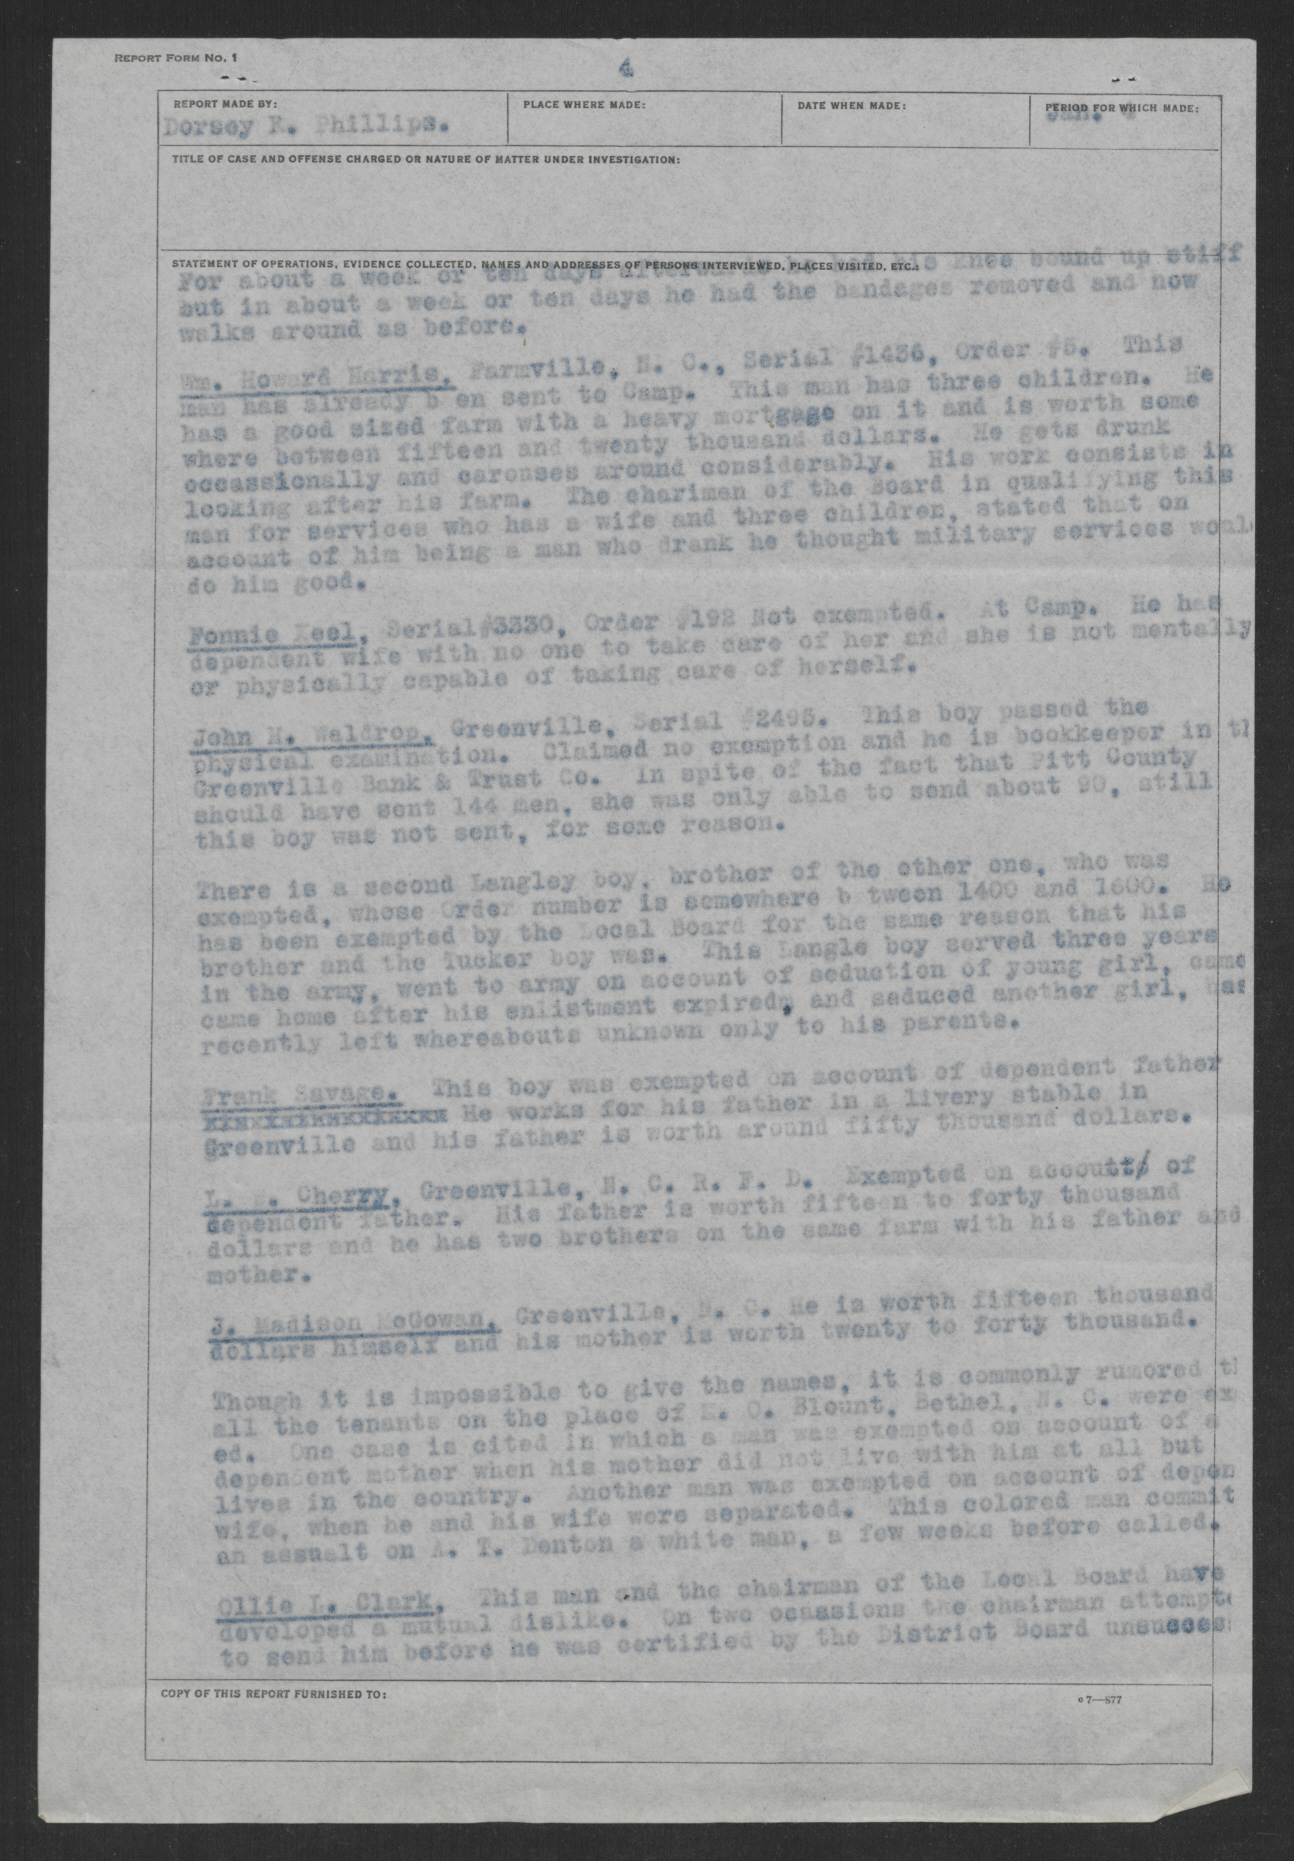 Report on Alleged Partiality of the Pitt County Exemption Board, January 10, 1918, page 3